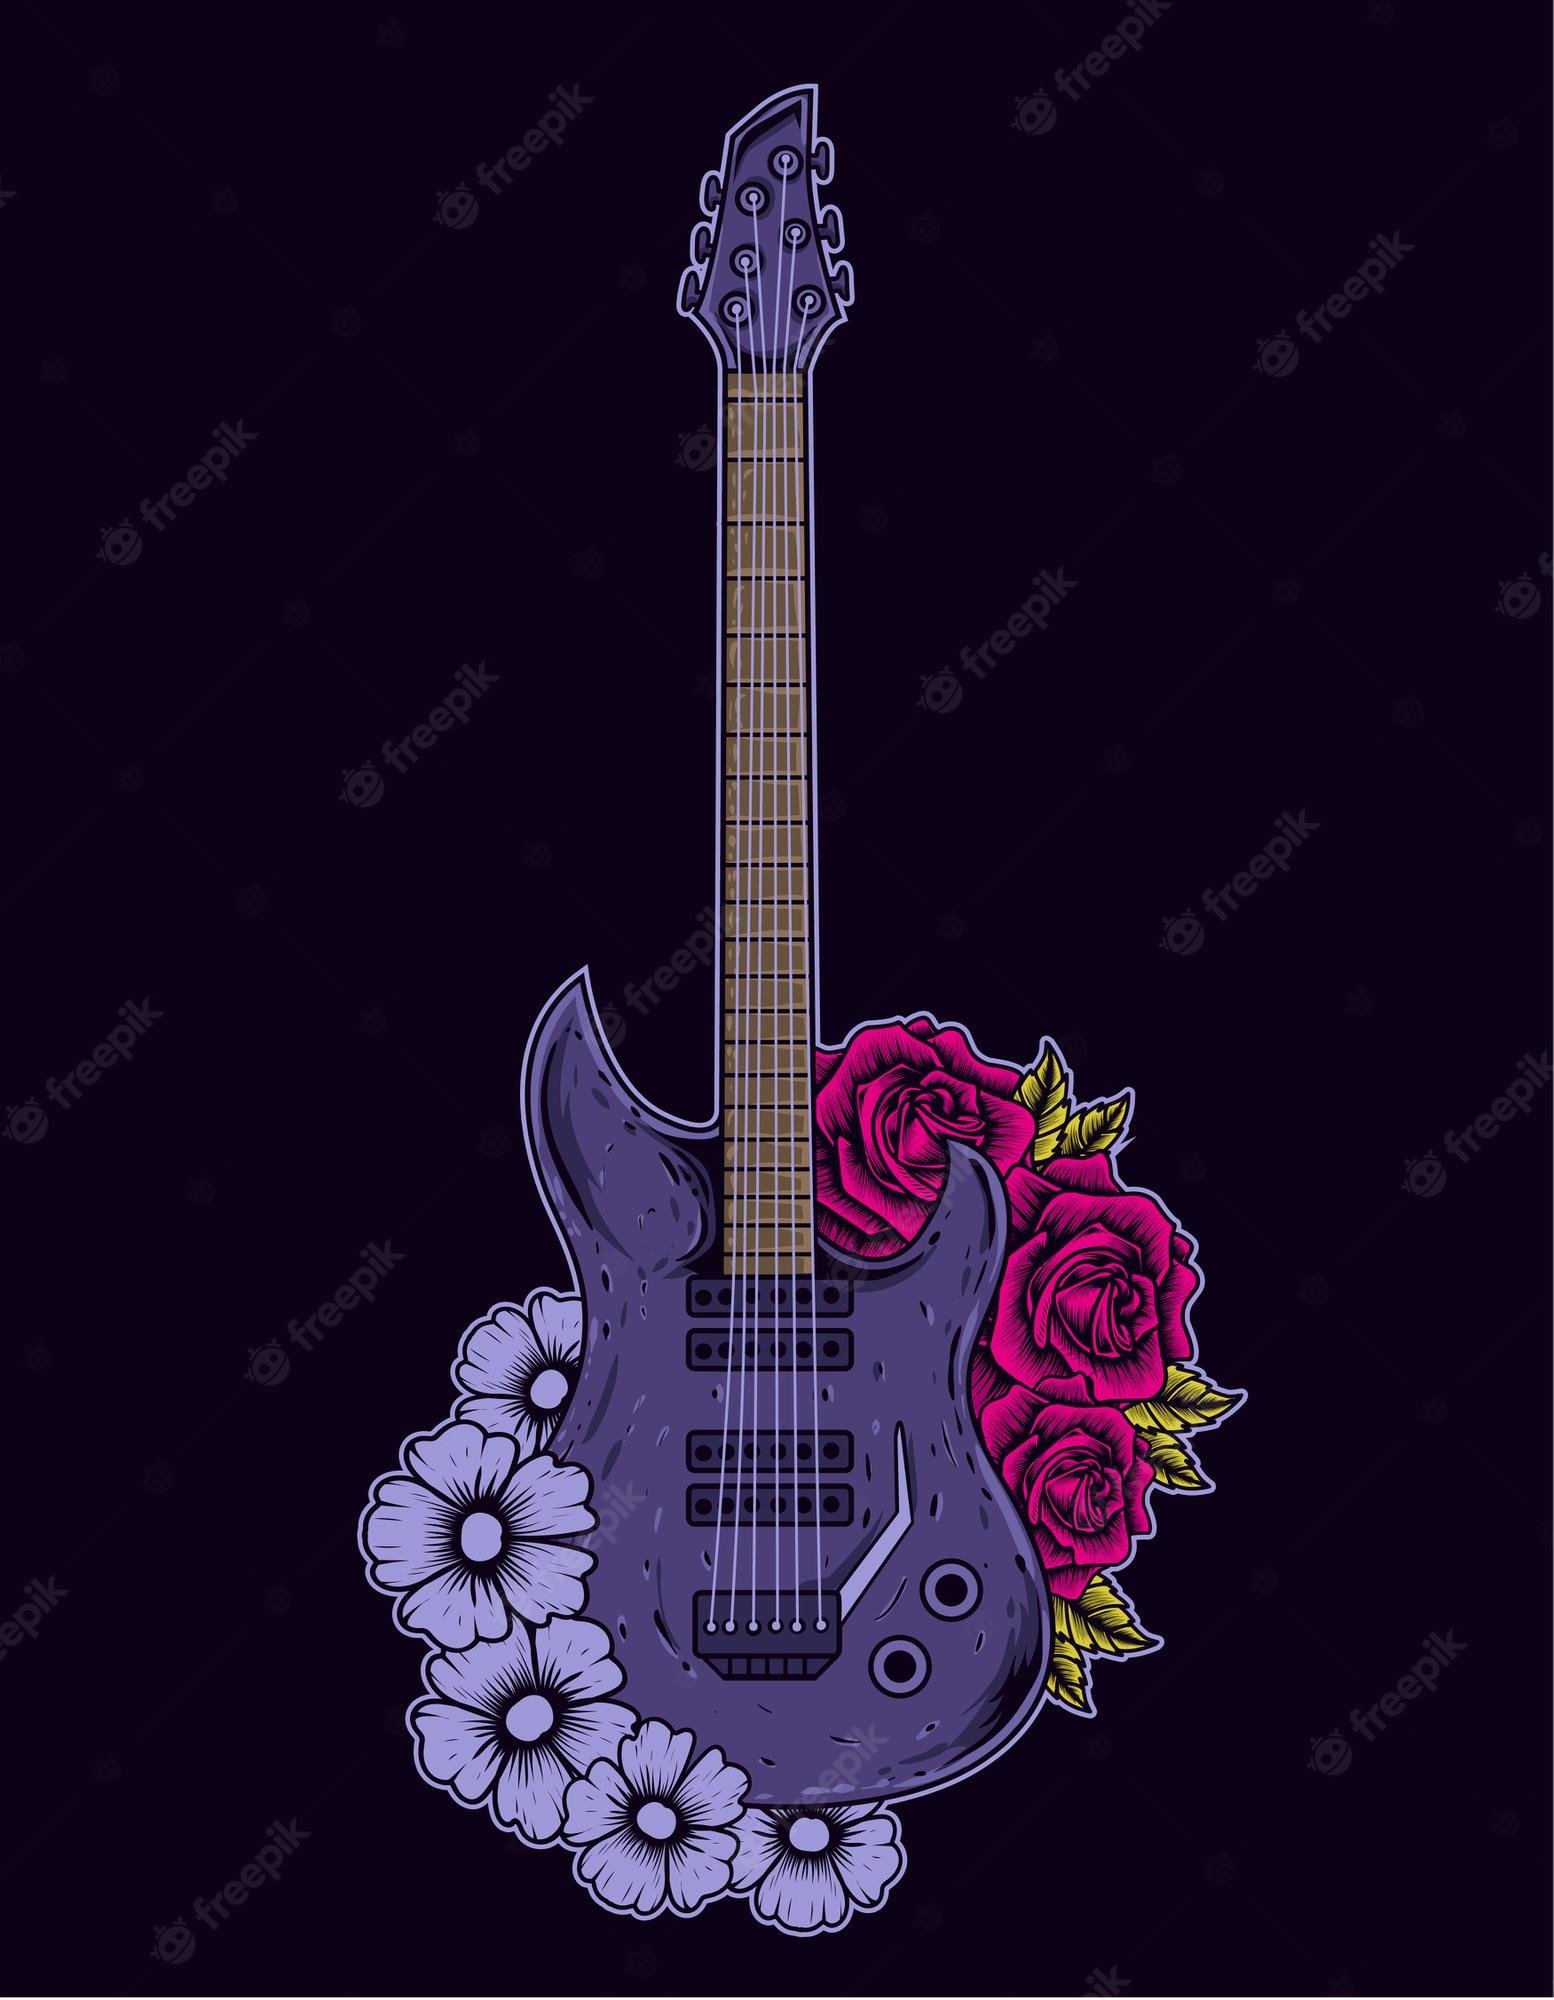 Premium Vector. Illustration electric guitar with flower